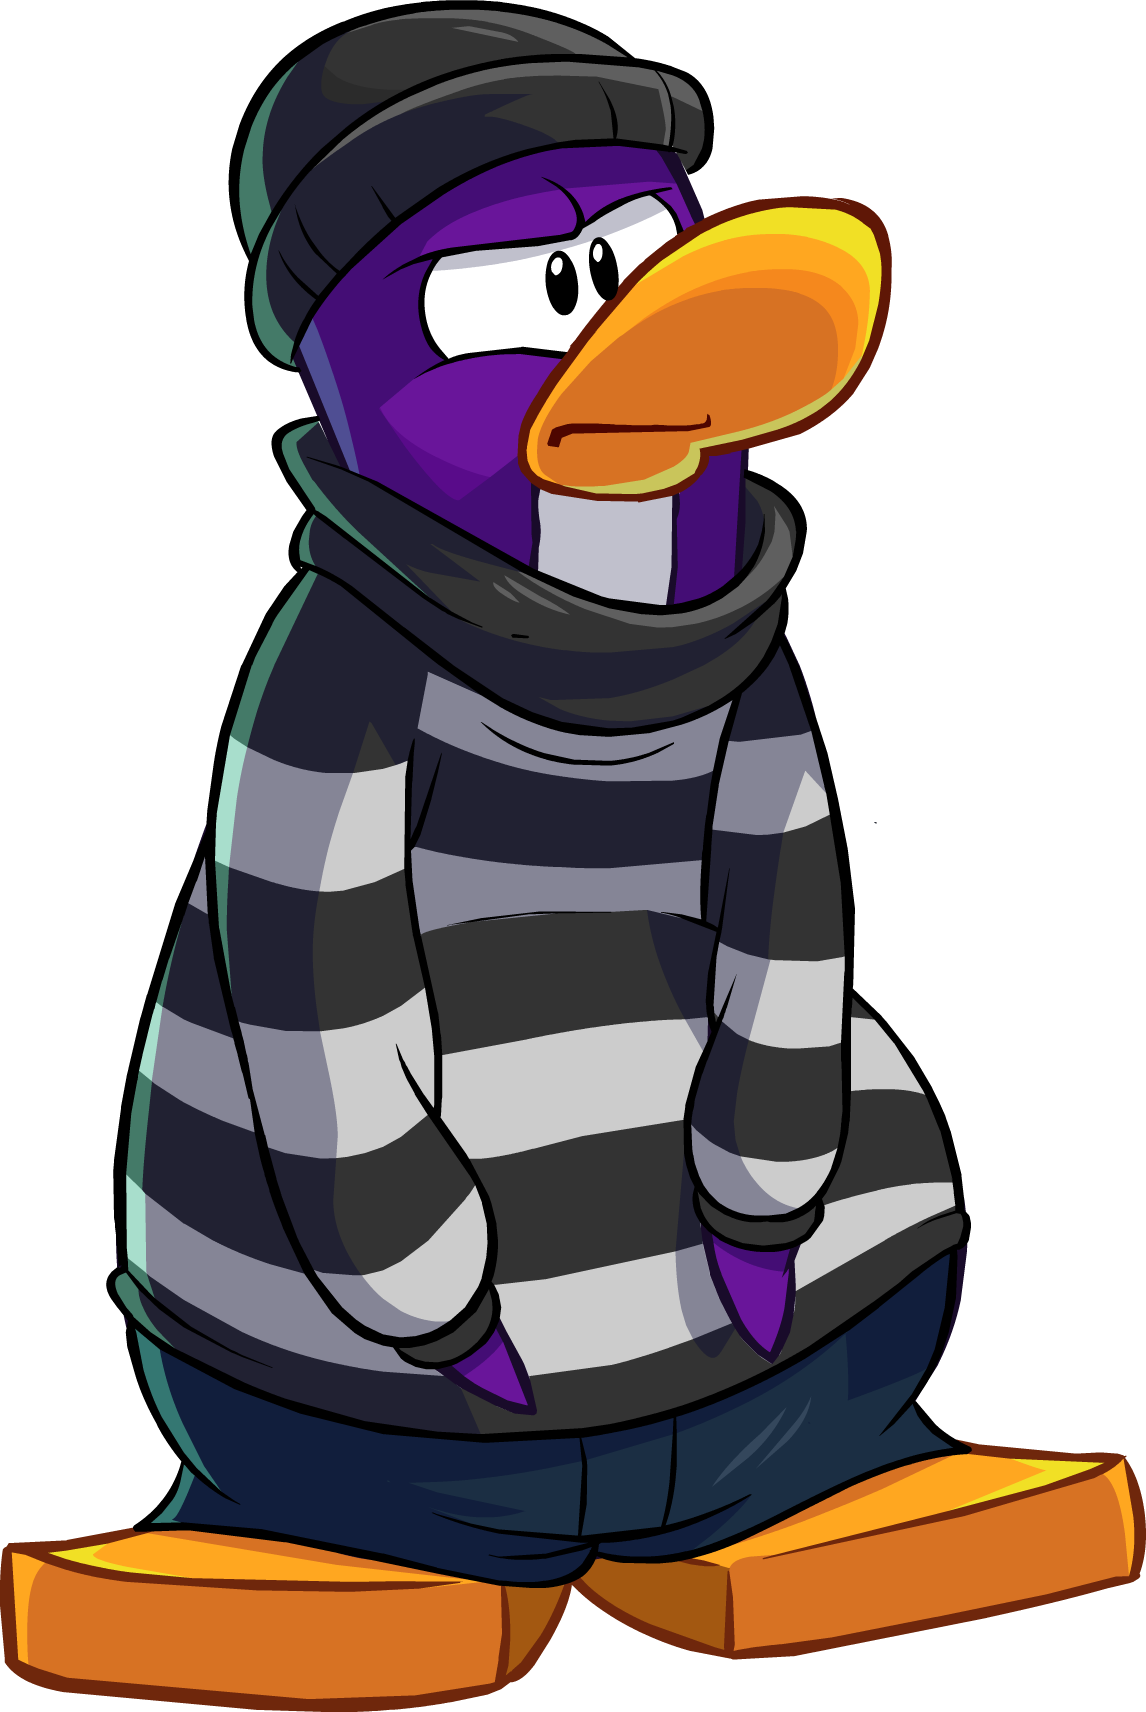 More From My Site - Club Penguin Robber (1146x1712)